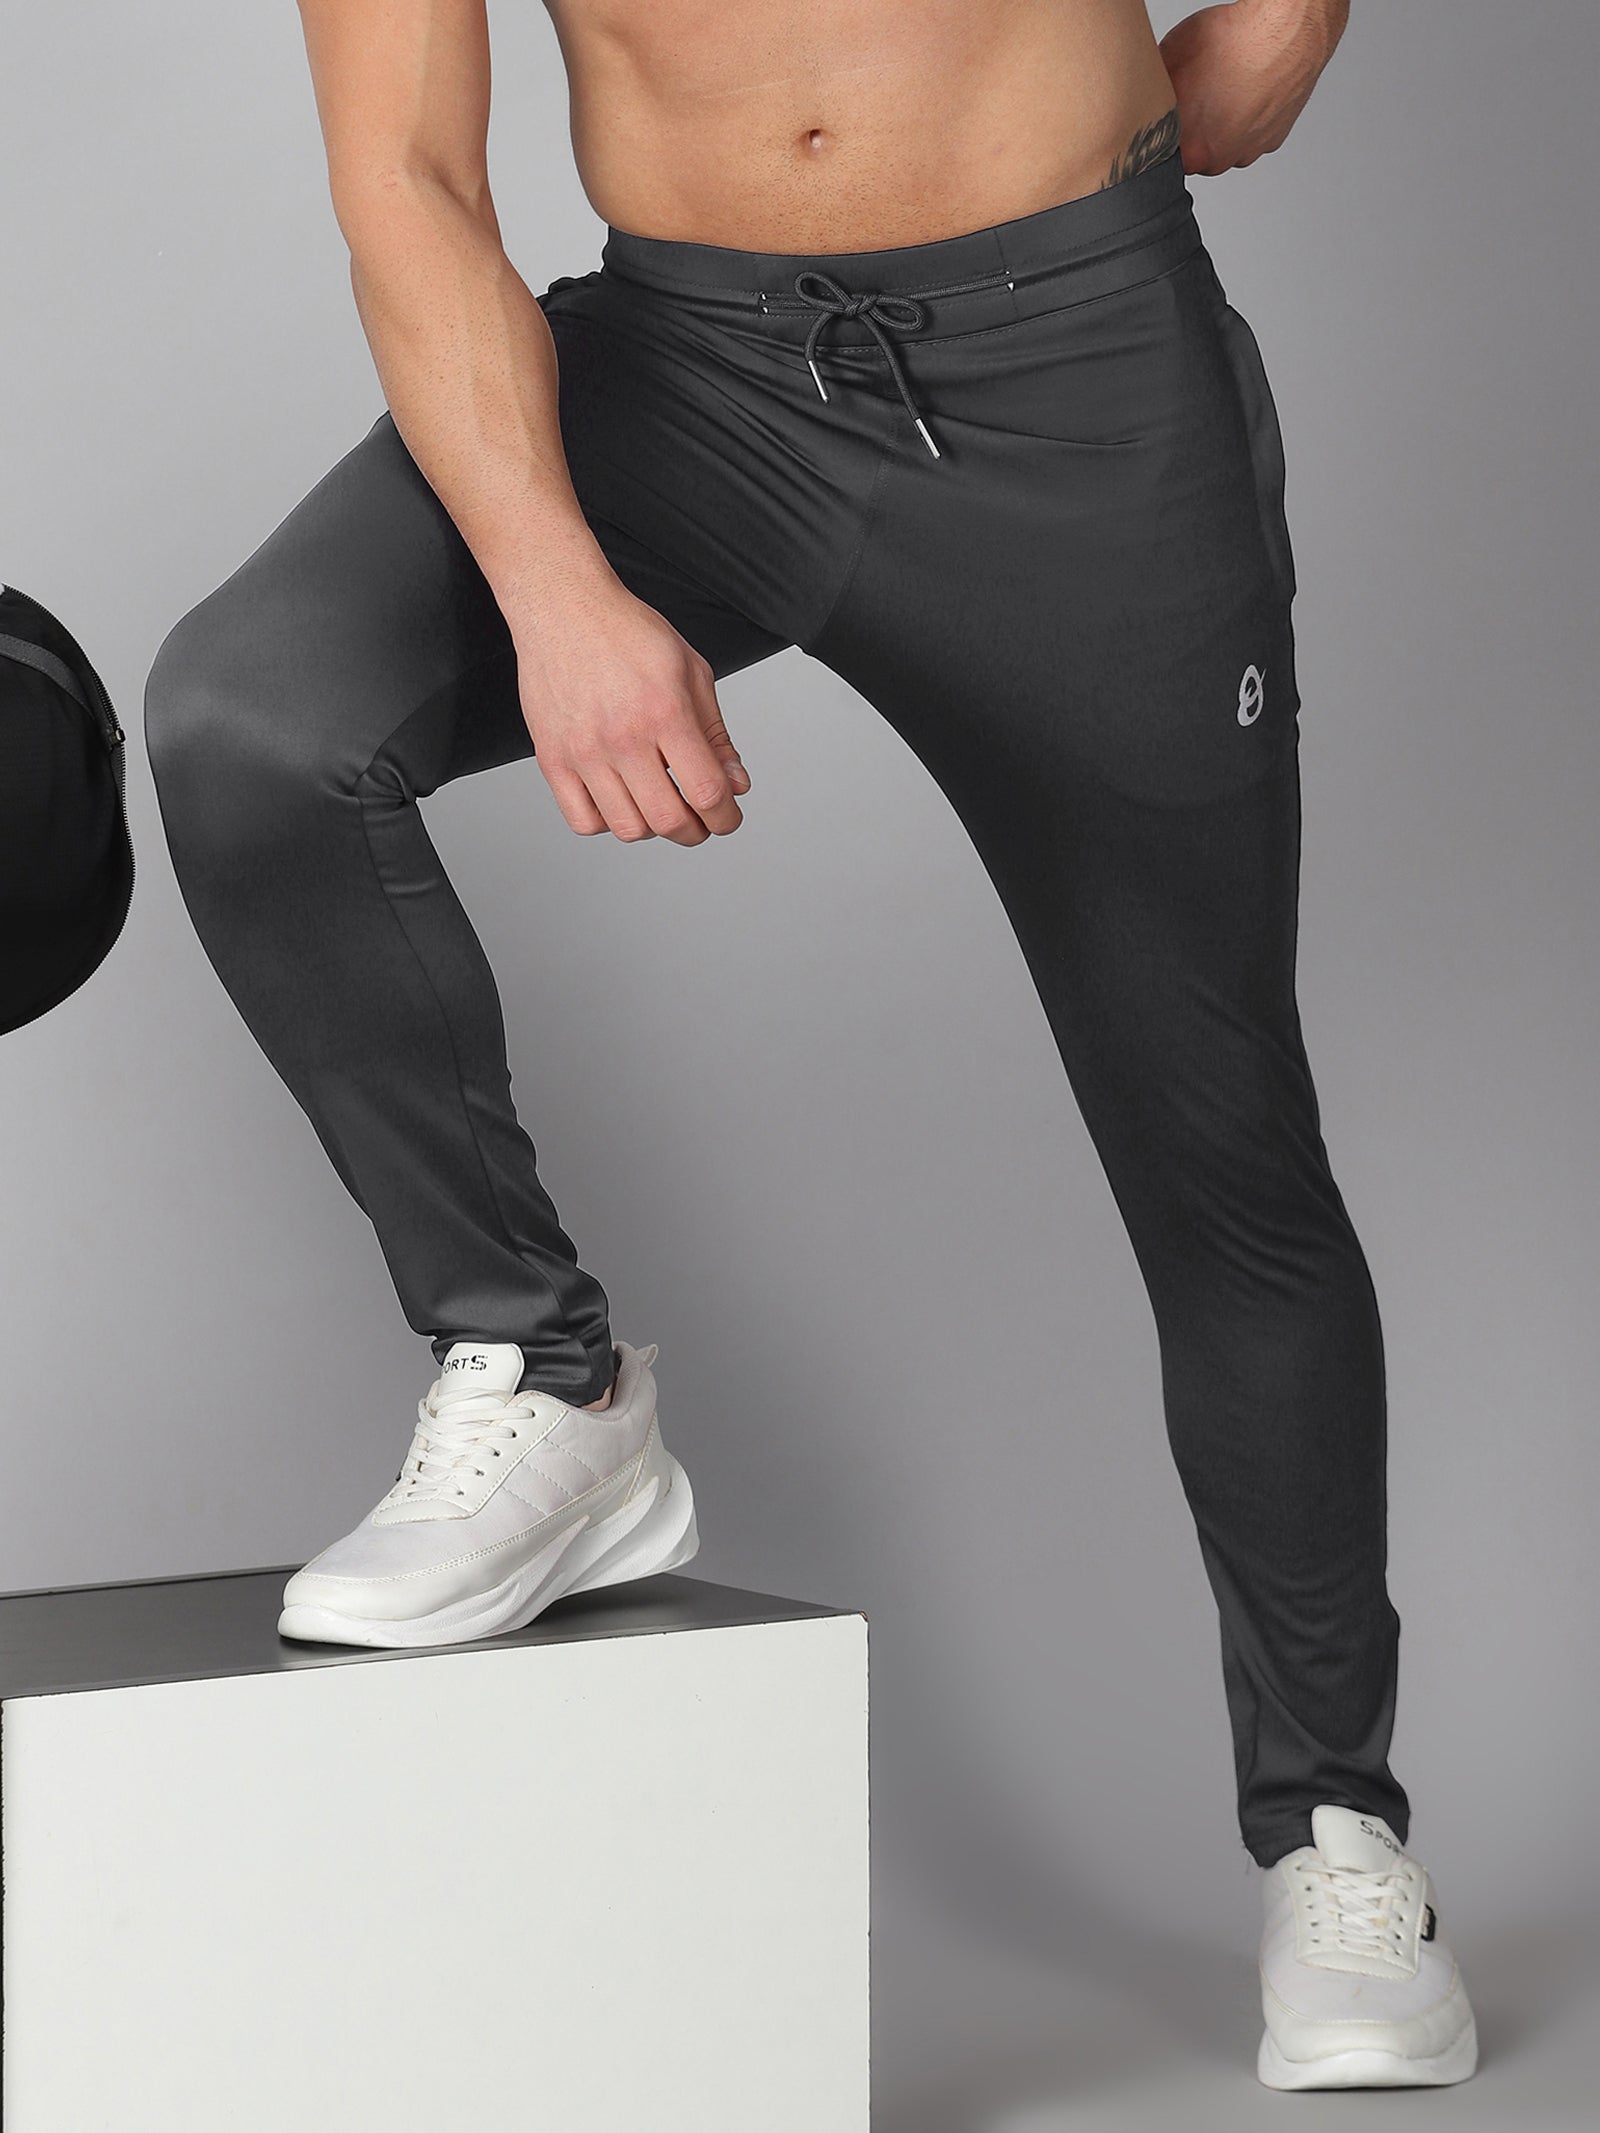 Mens Sports Track Pant - Mens Sports Track Pant buyers, suppliers,  importers, exporters and manufacturers - Latest price and trends